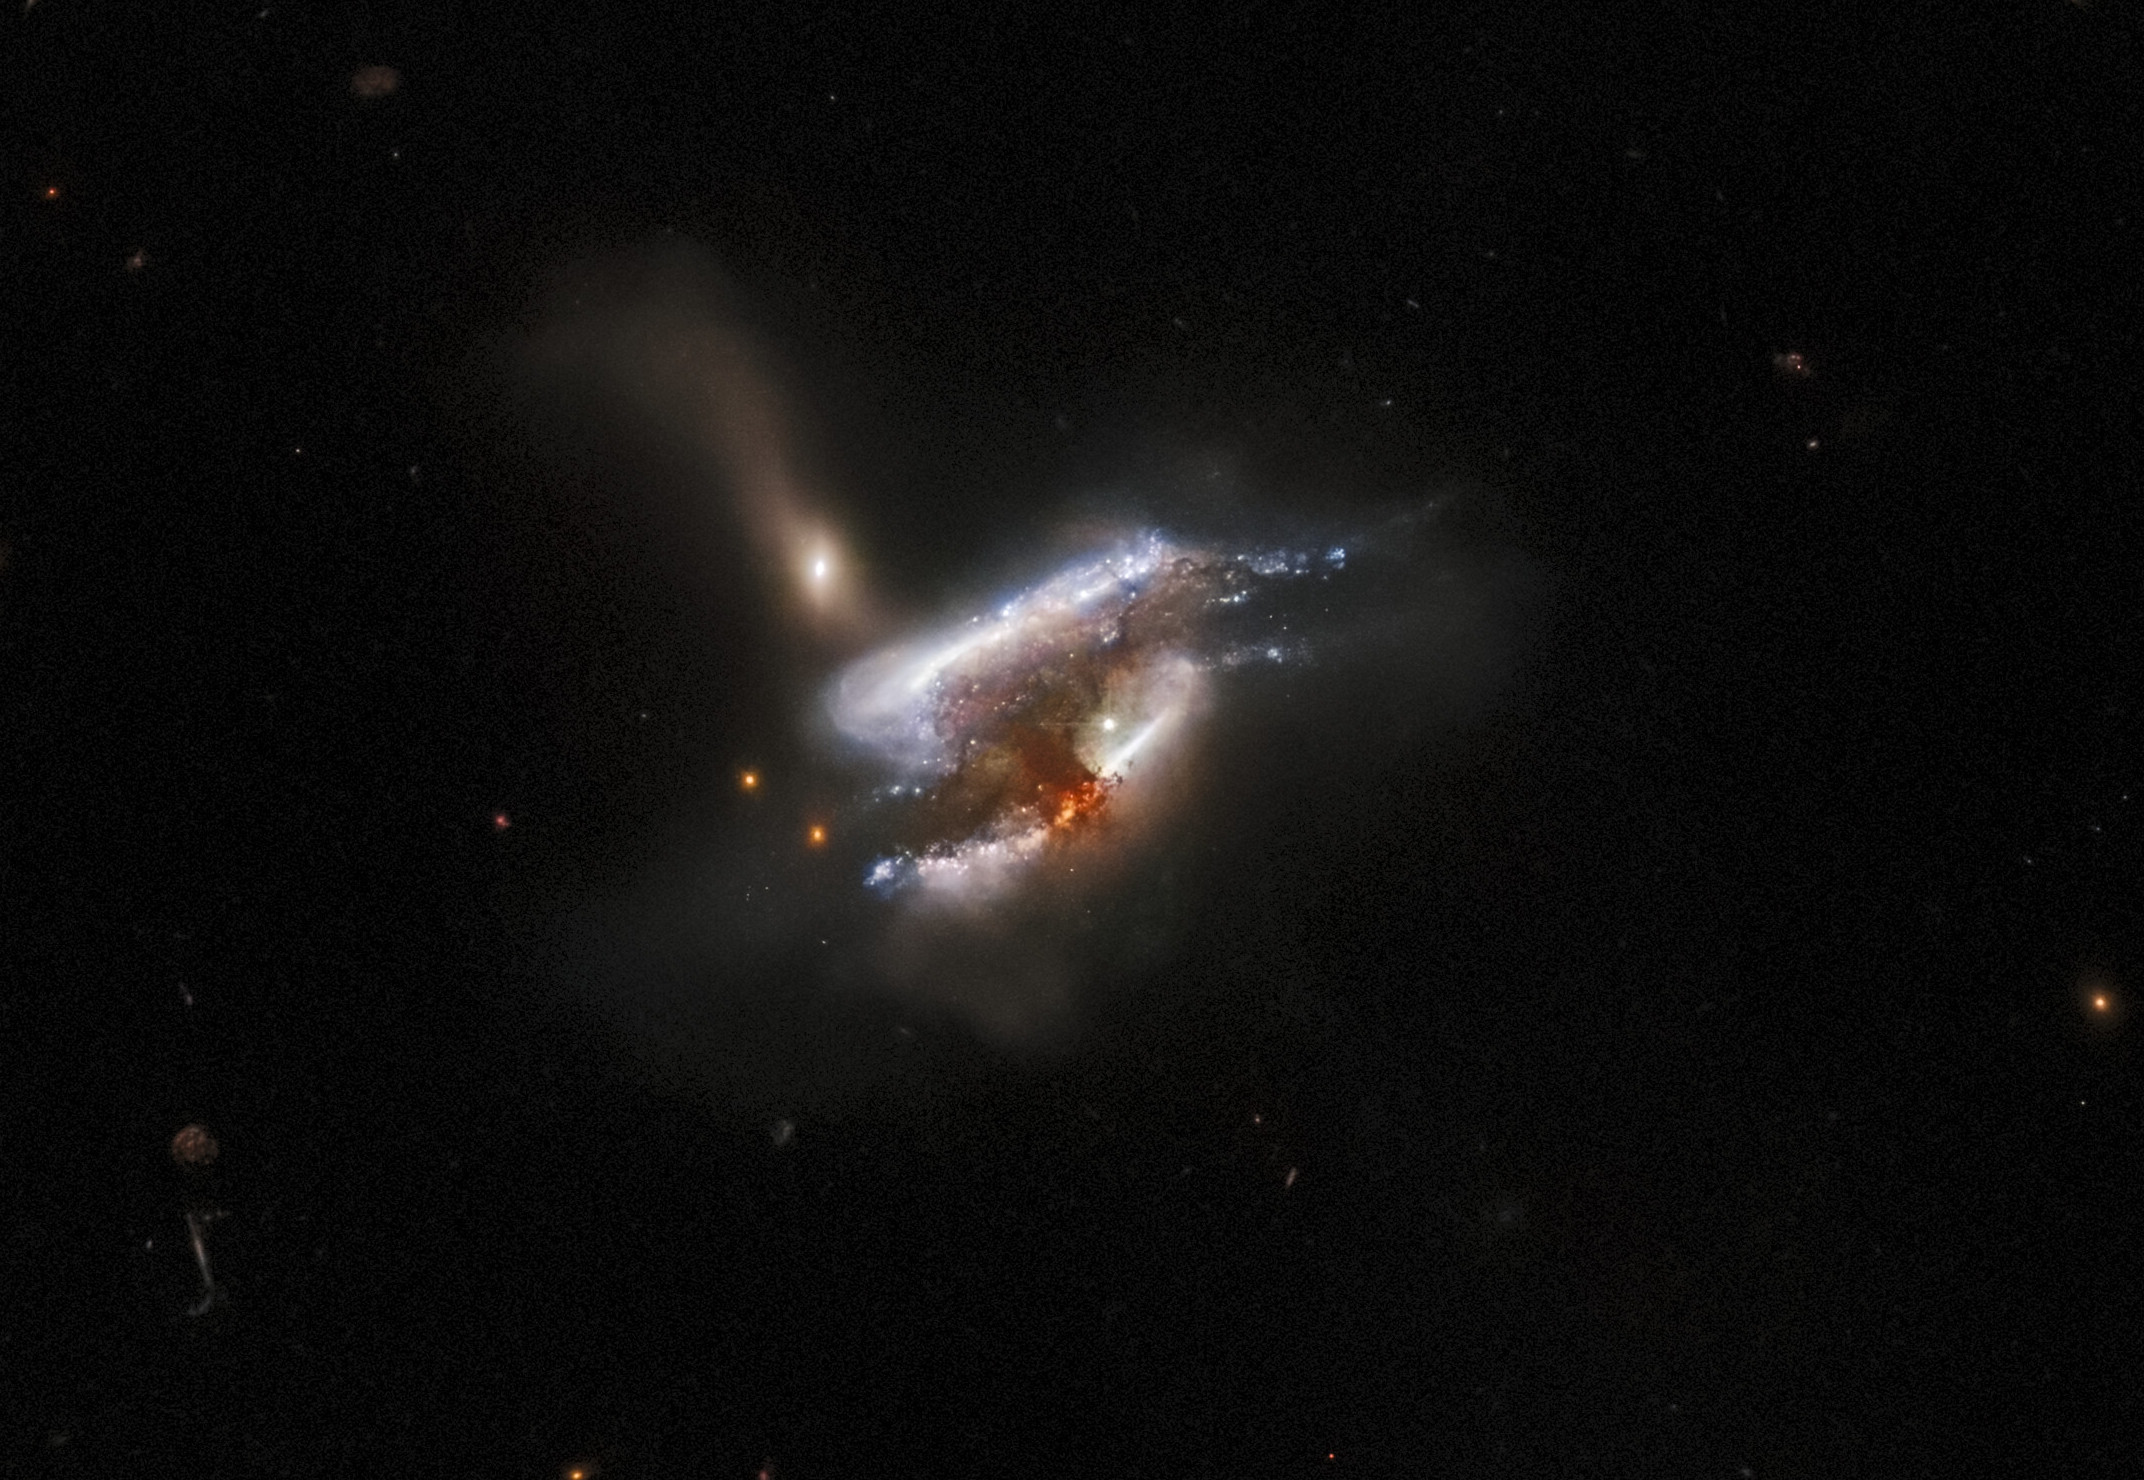 Three galaxies collide in this stunning new Hubble image.